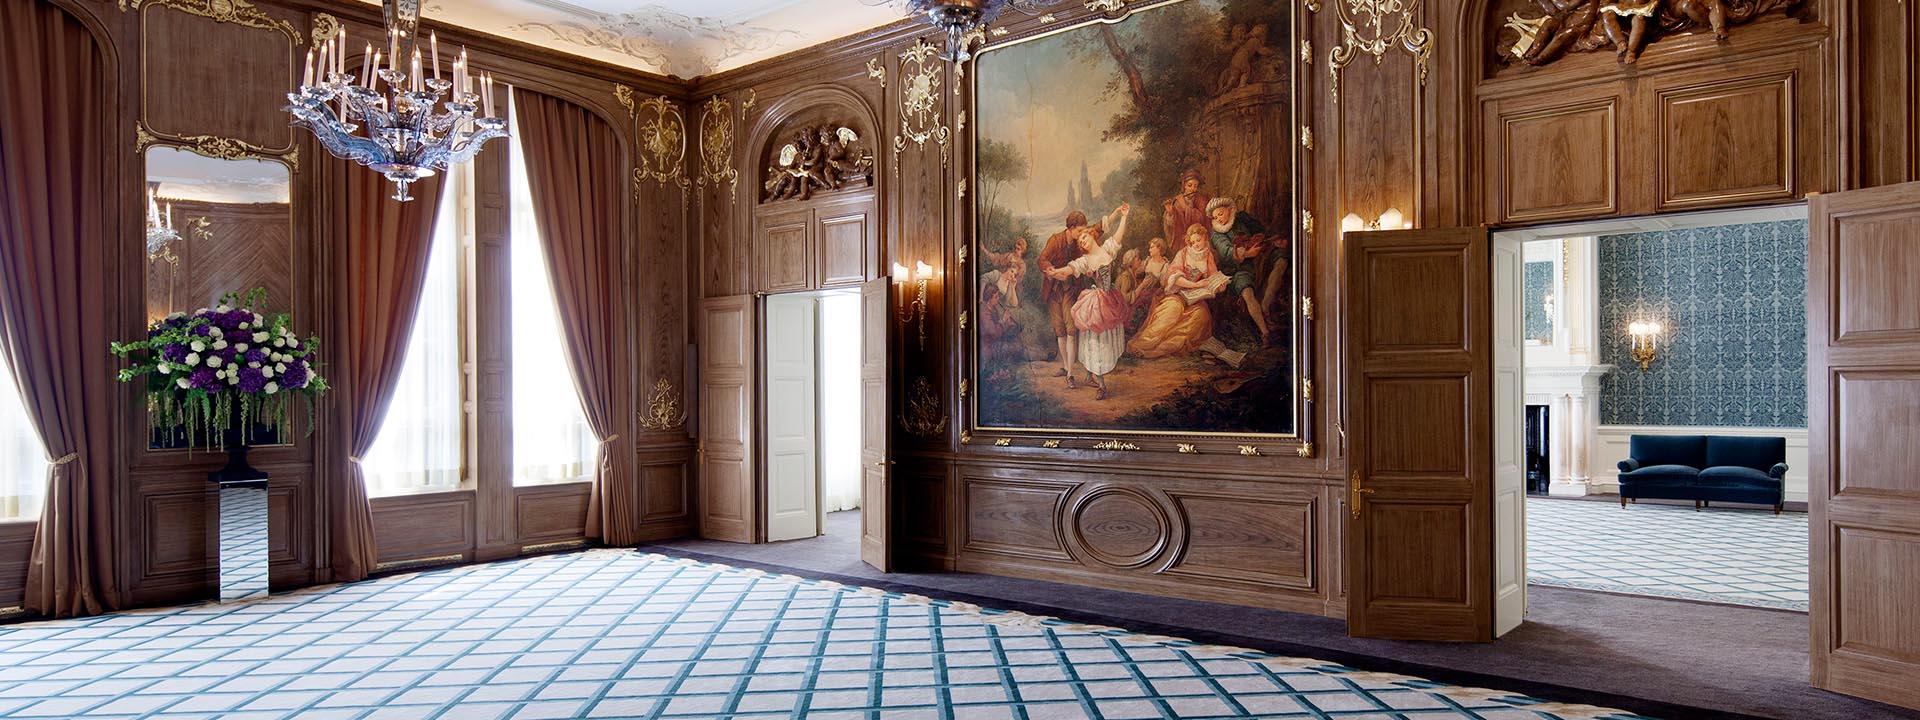 A view of the French Salon and Renaissance-style cherubs over the doors and a mural of a dancing couple.